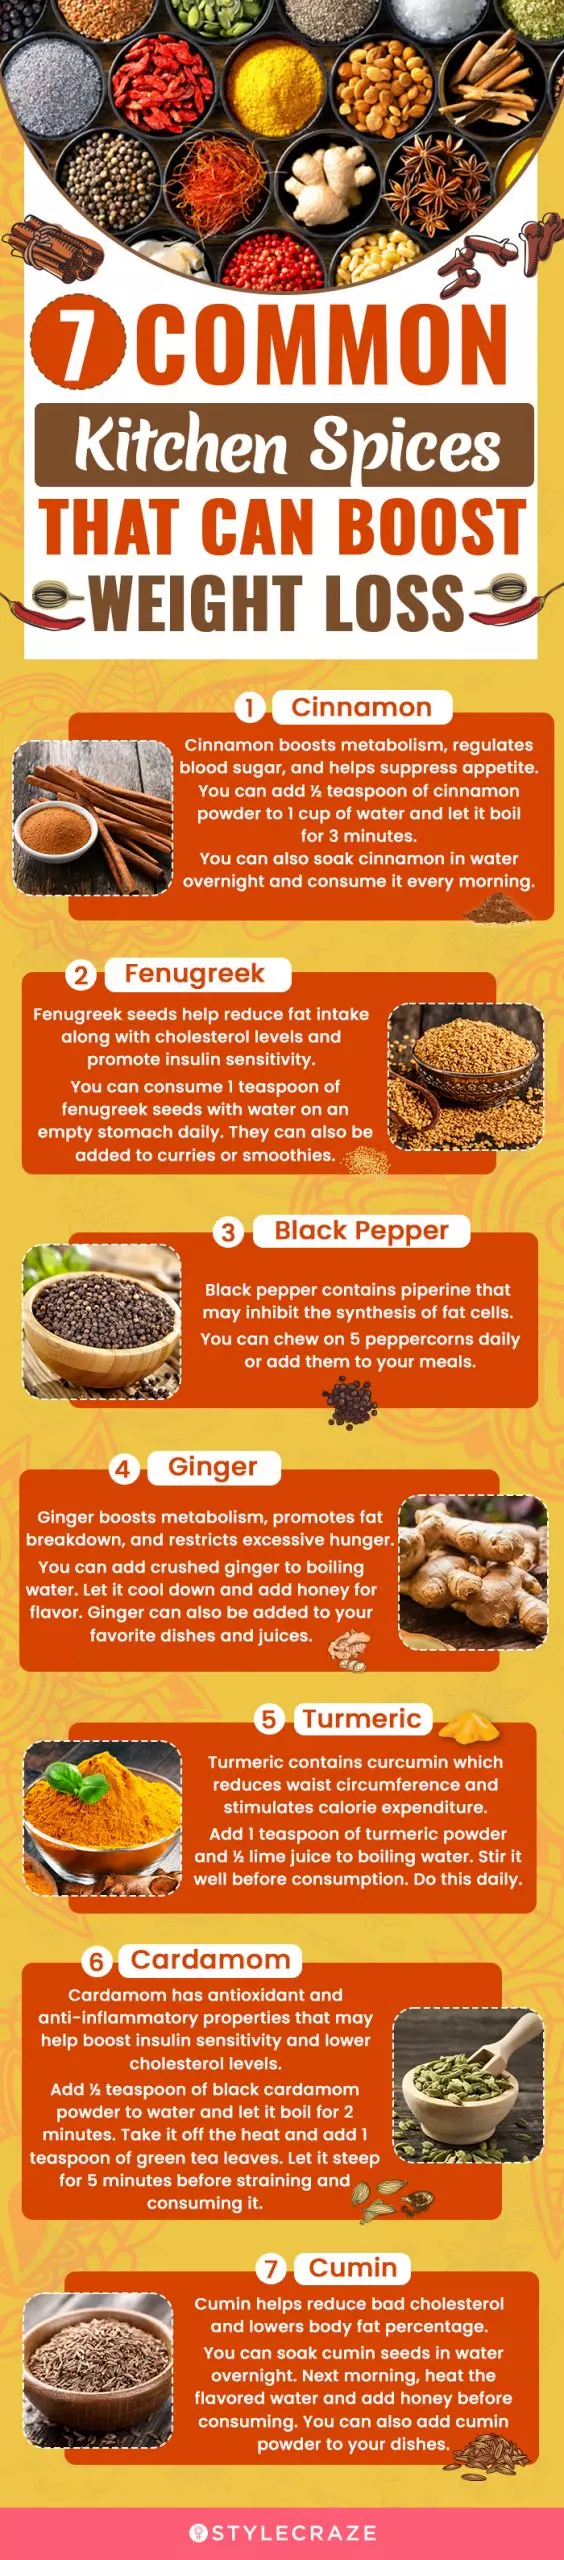 7 common kitchen spices that can boost weight loss (infographic)